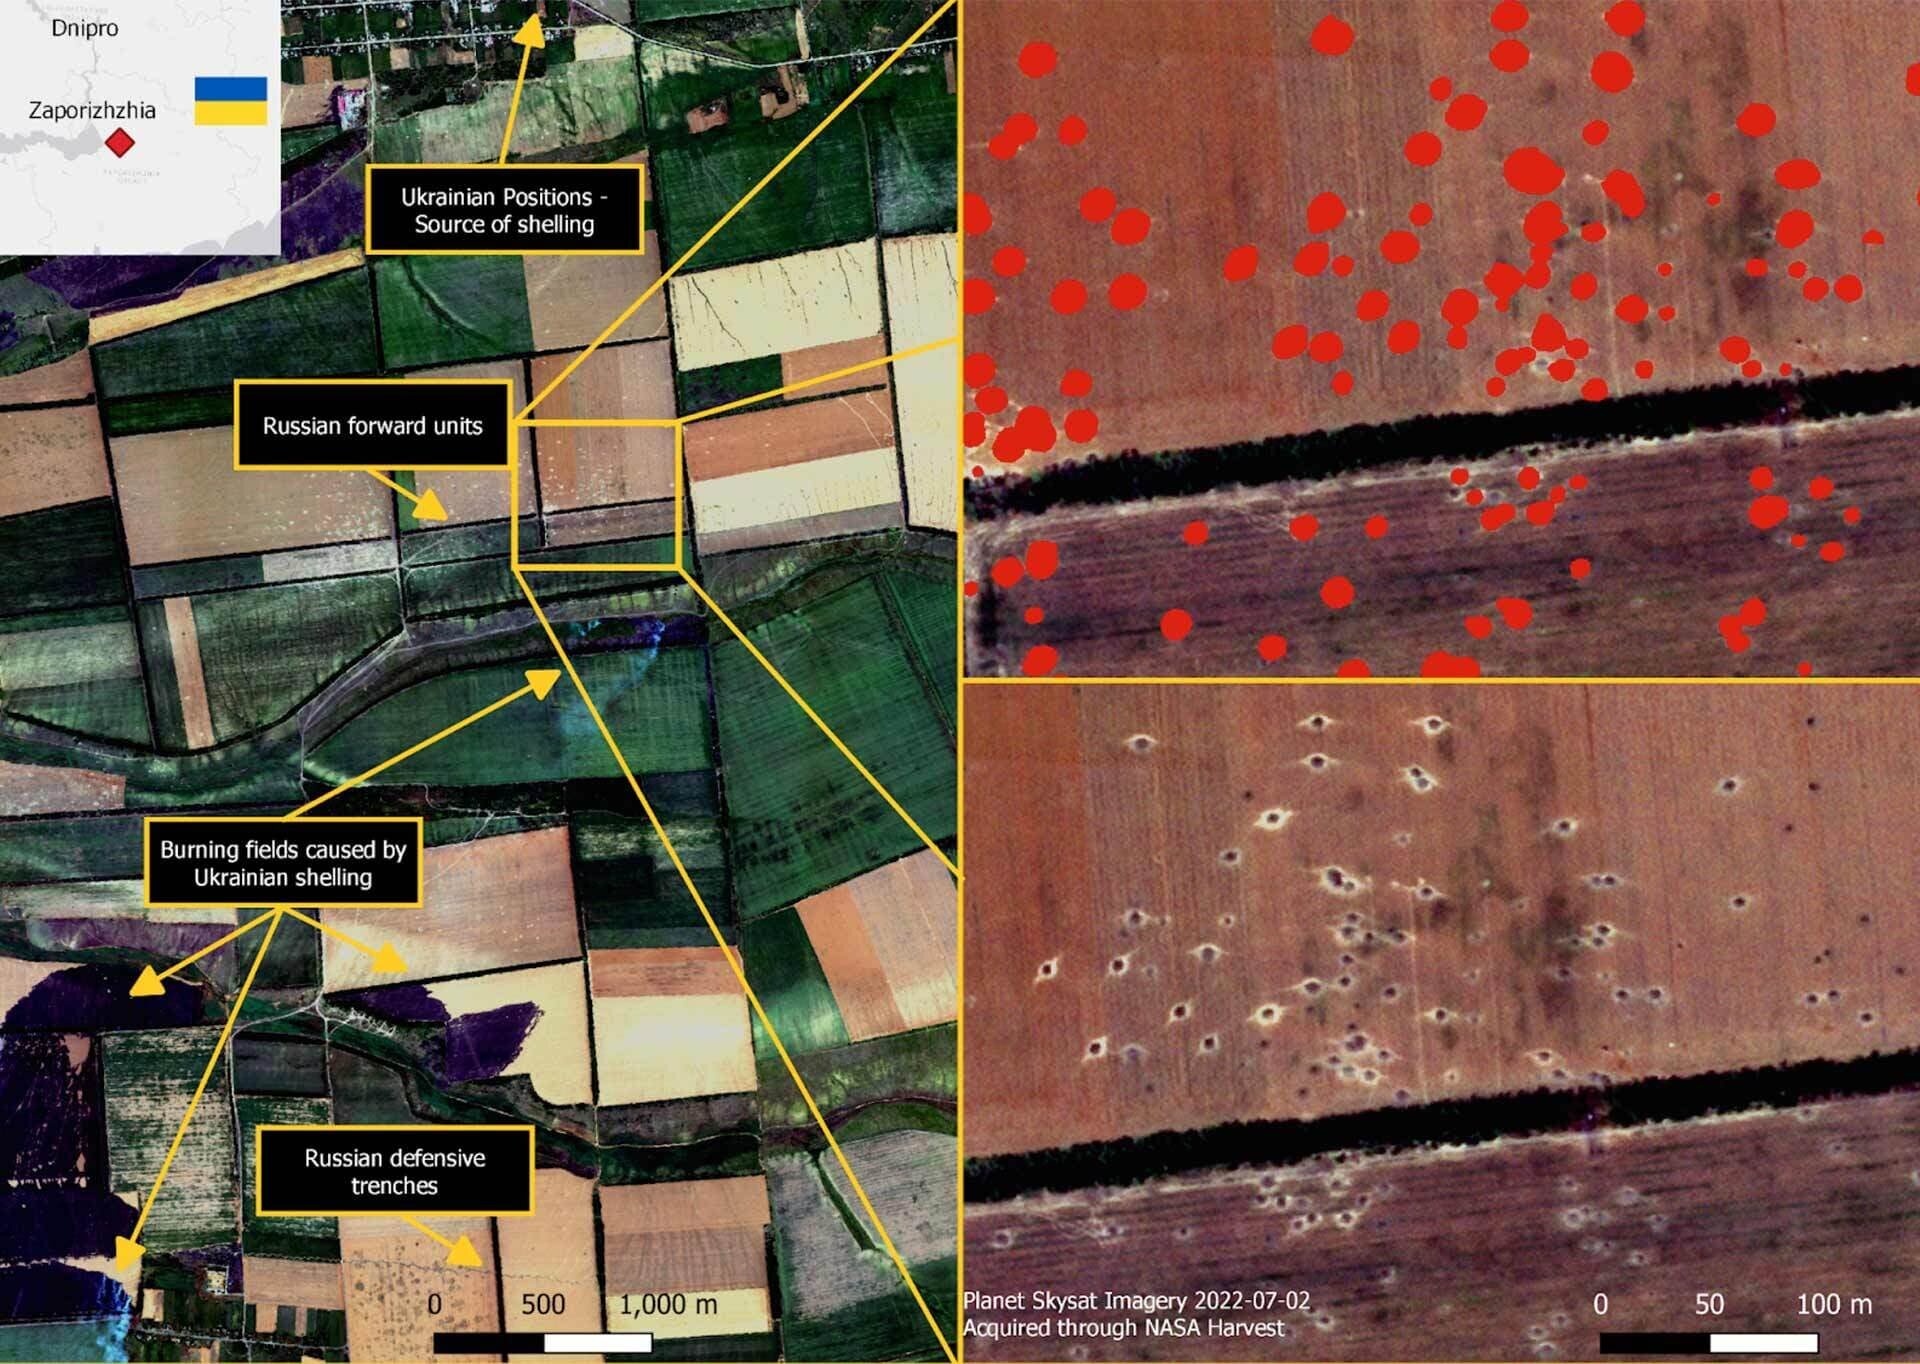 Unexploded ordnance is scattered across Ukraine’s front lines, so researchers are mapping hot spots with AI